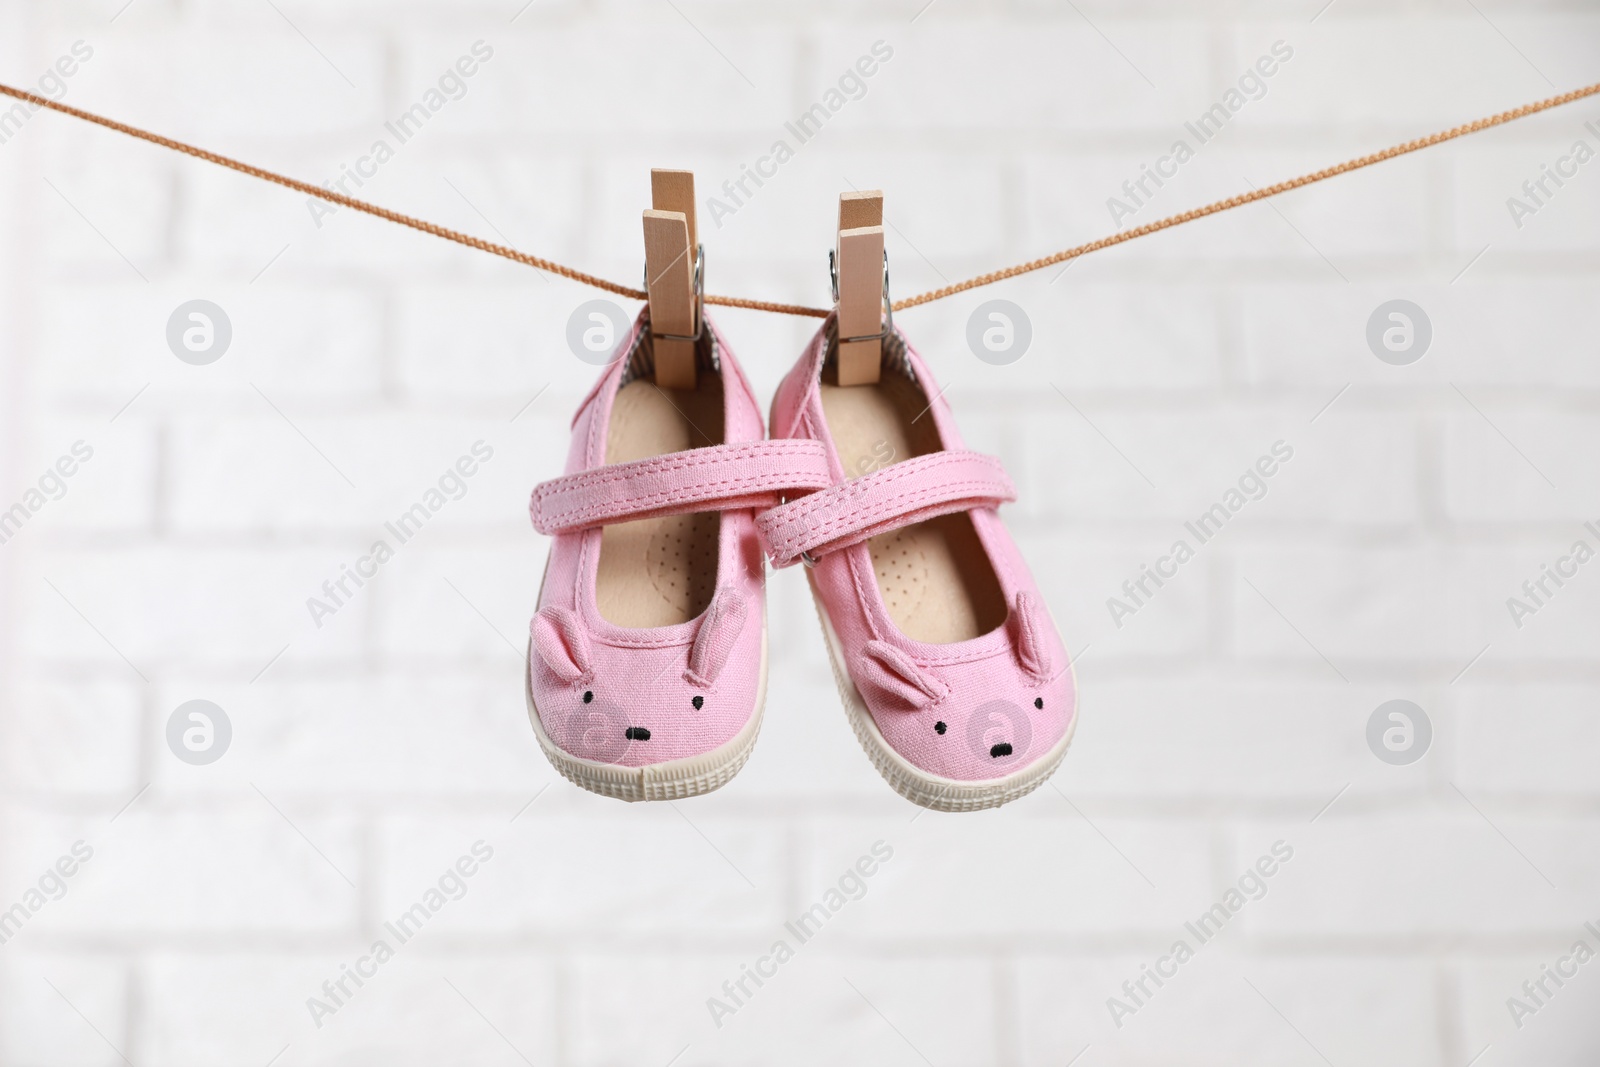 Photo of Cute pink baby shoes drying on washing line against white brick wall